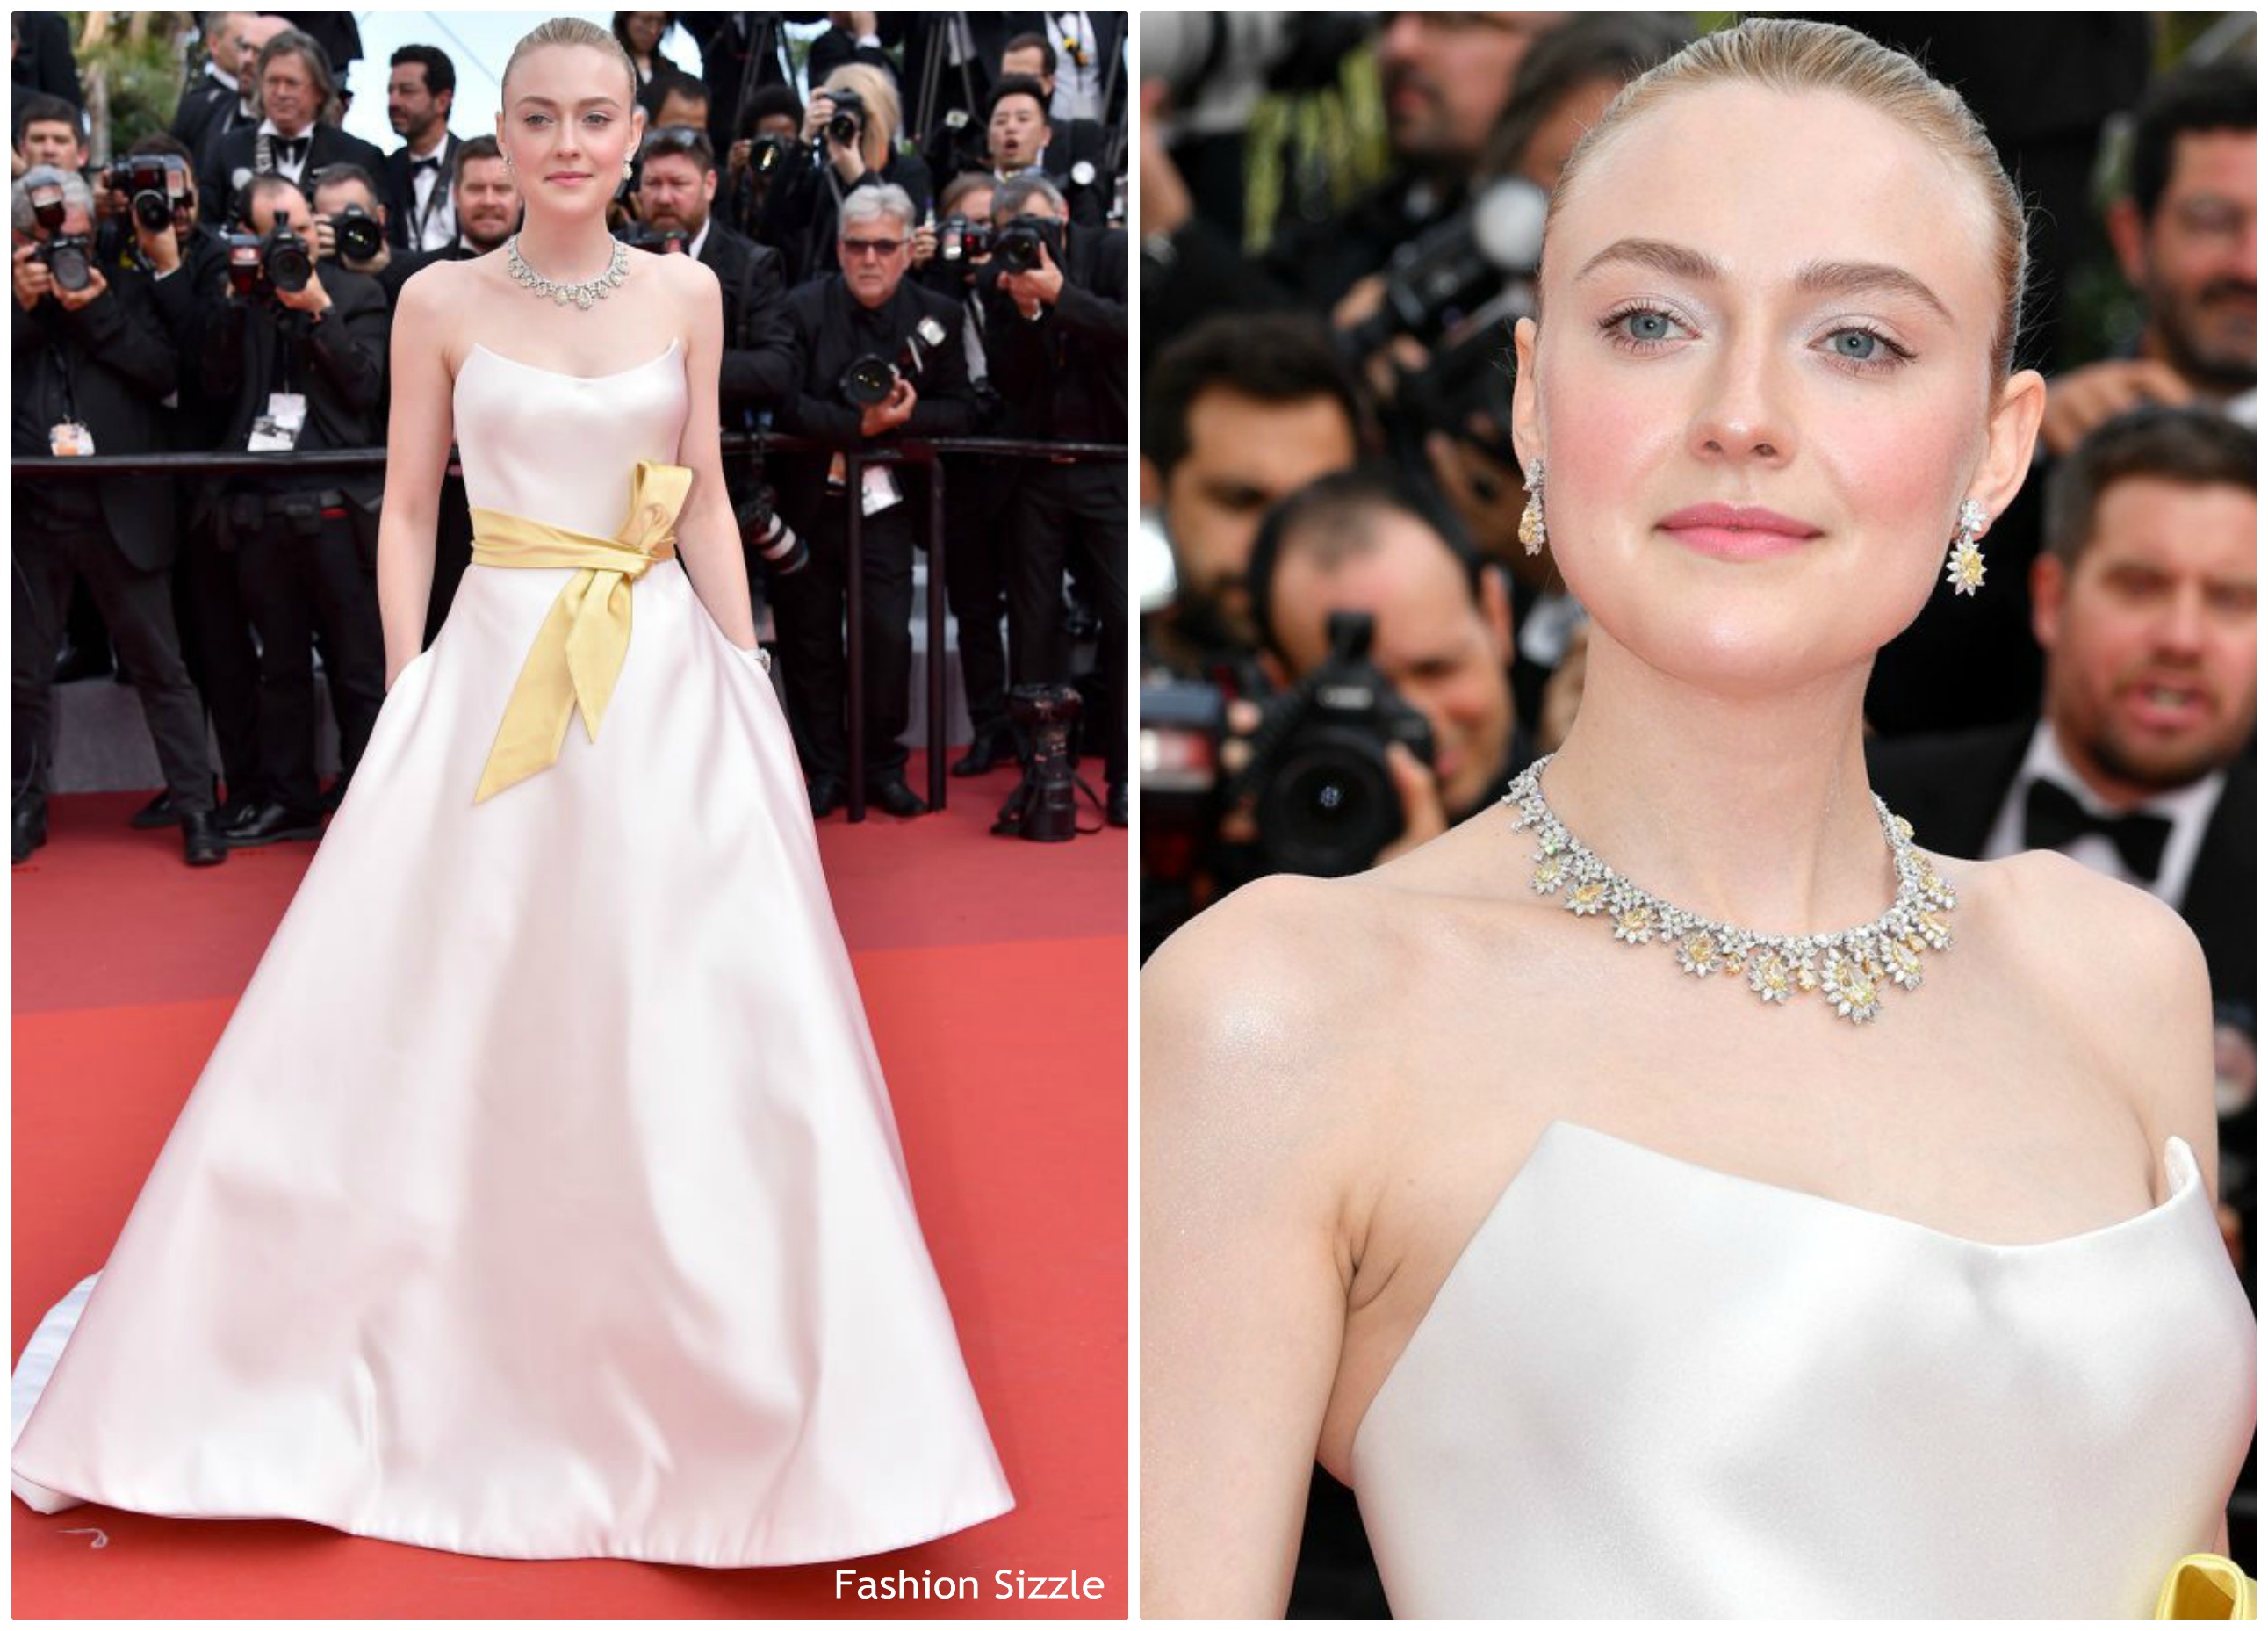 Dakota Fanning In Armani Prive @ ‘Once Upon a Time In Hollywood’ Cannes